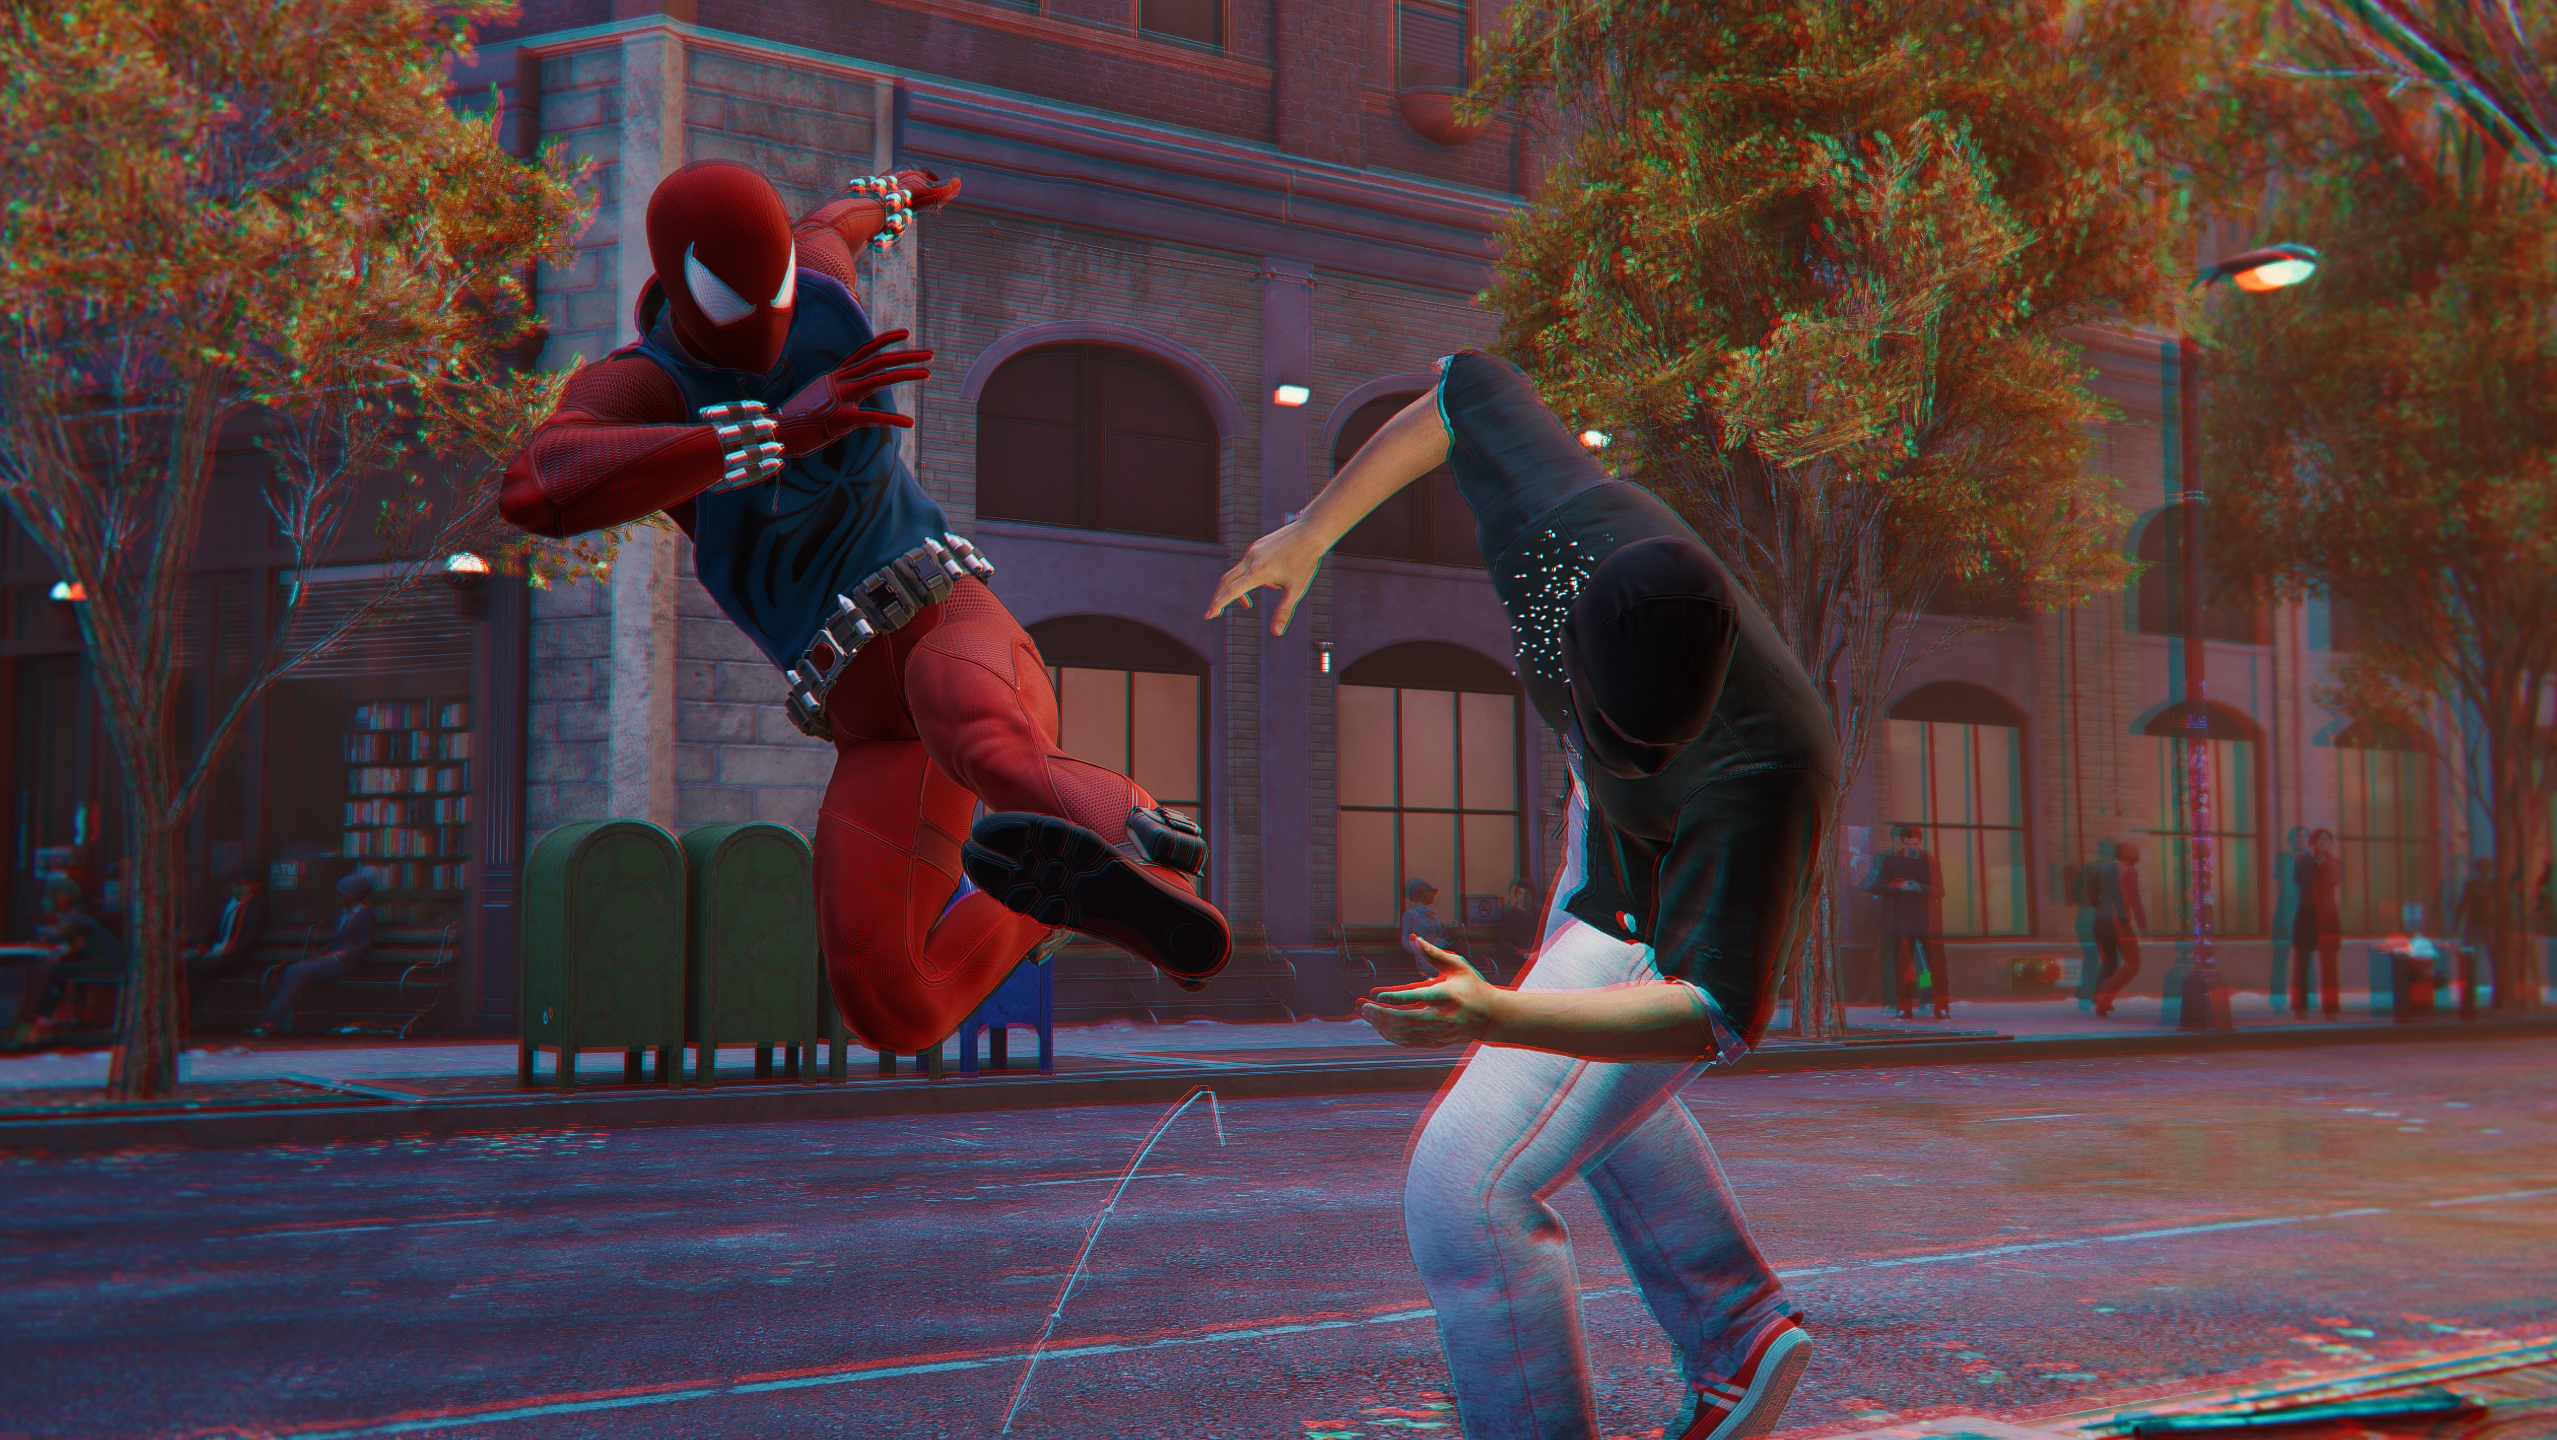 An Alleged Anti-LGBTQ Mod For 'Spider-Man Remastered' On PC Has